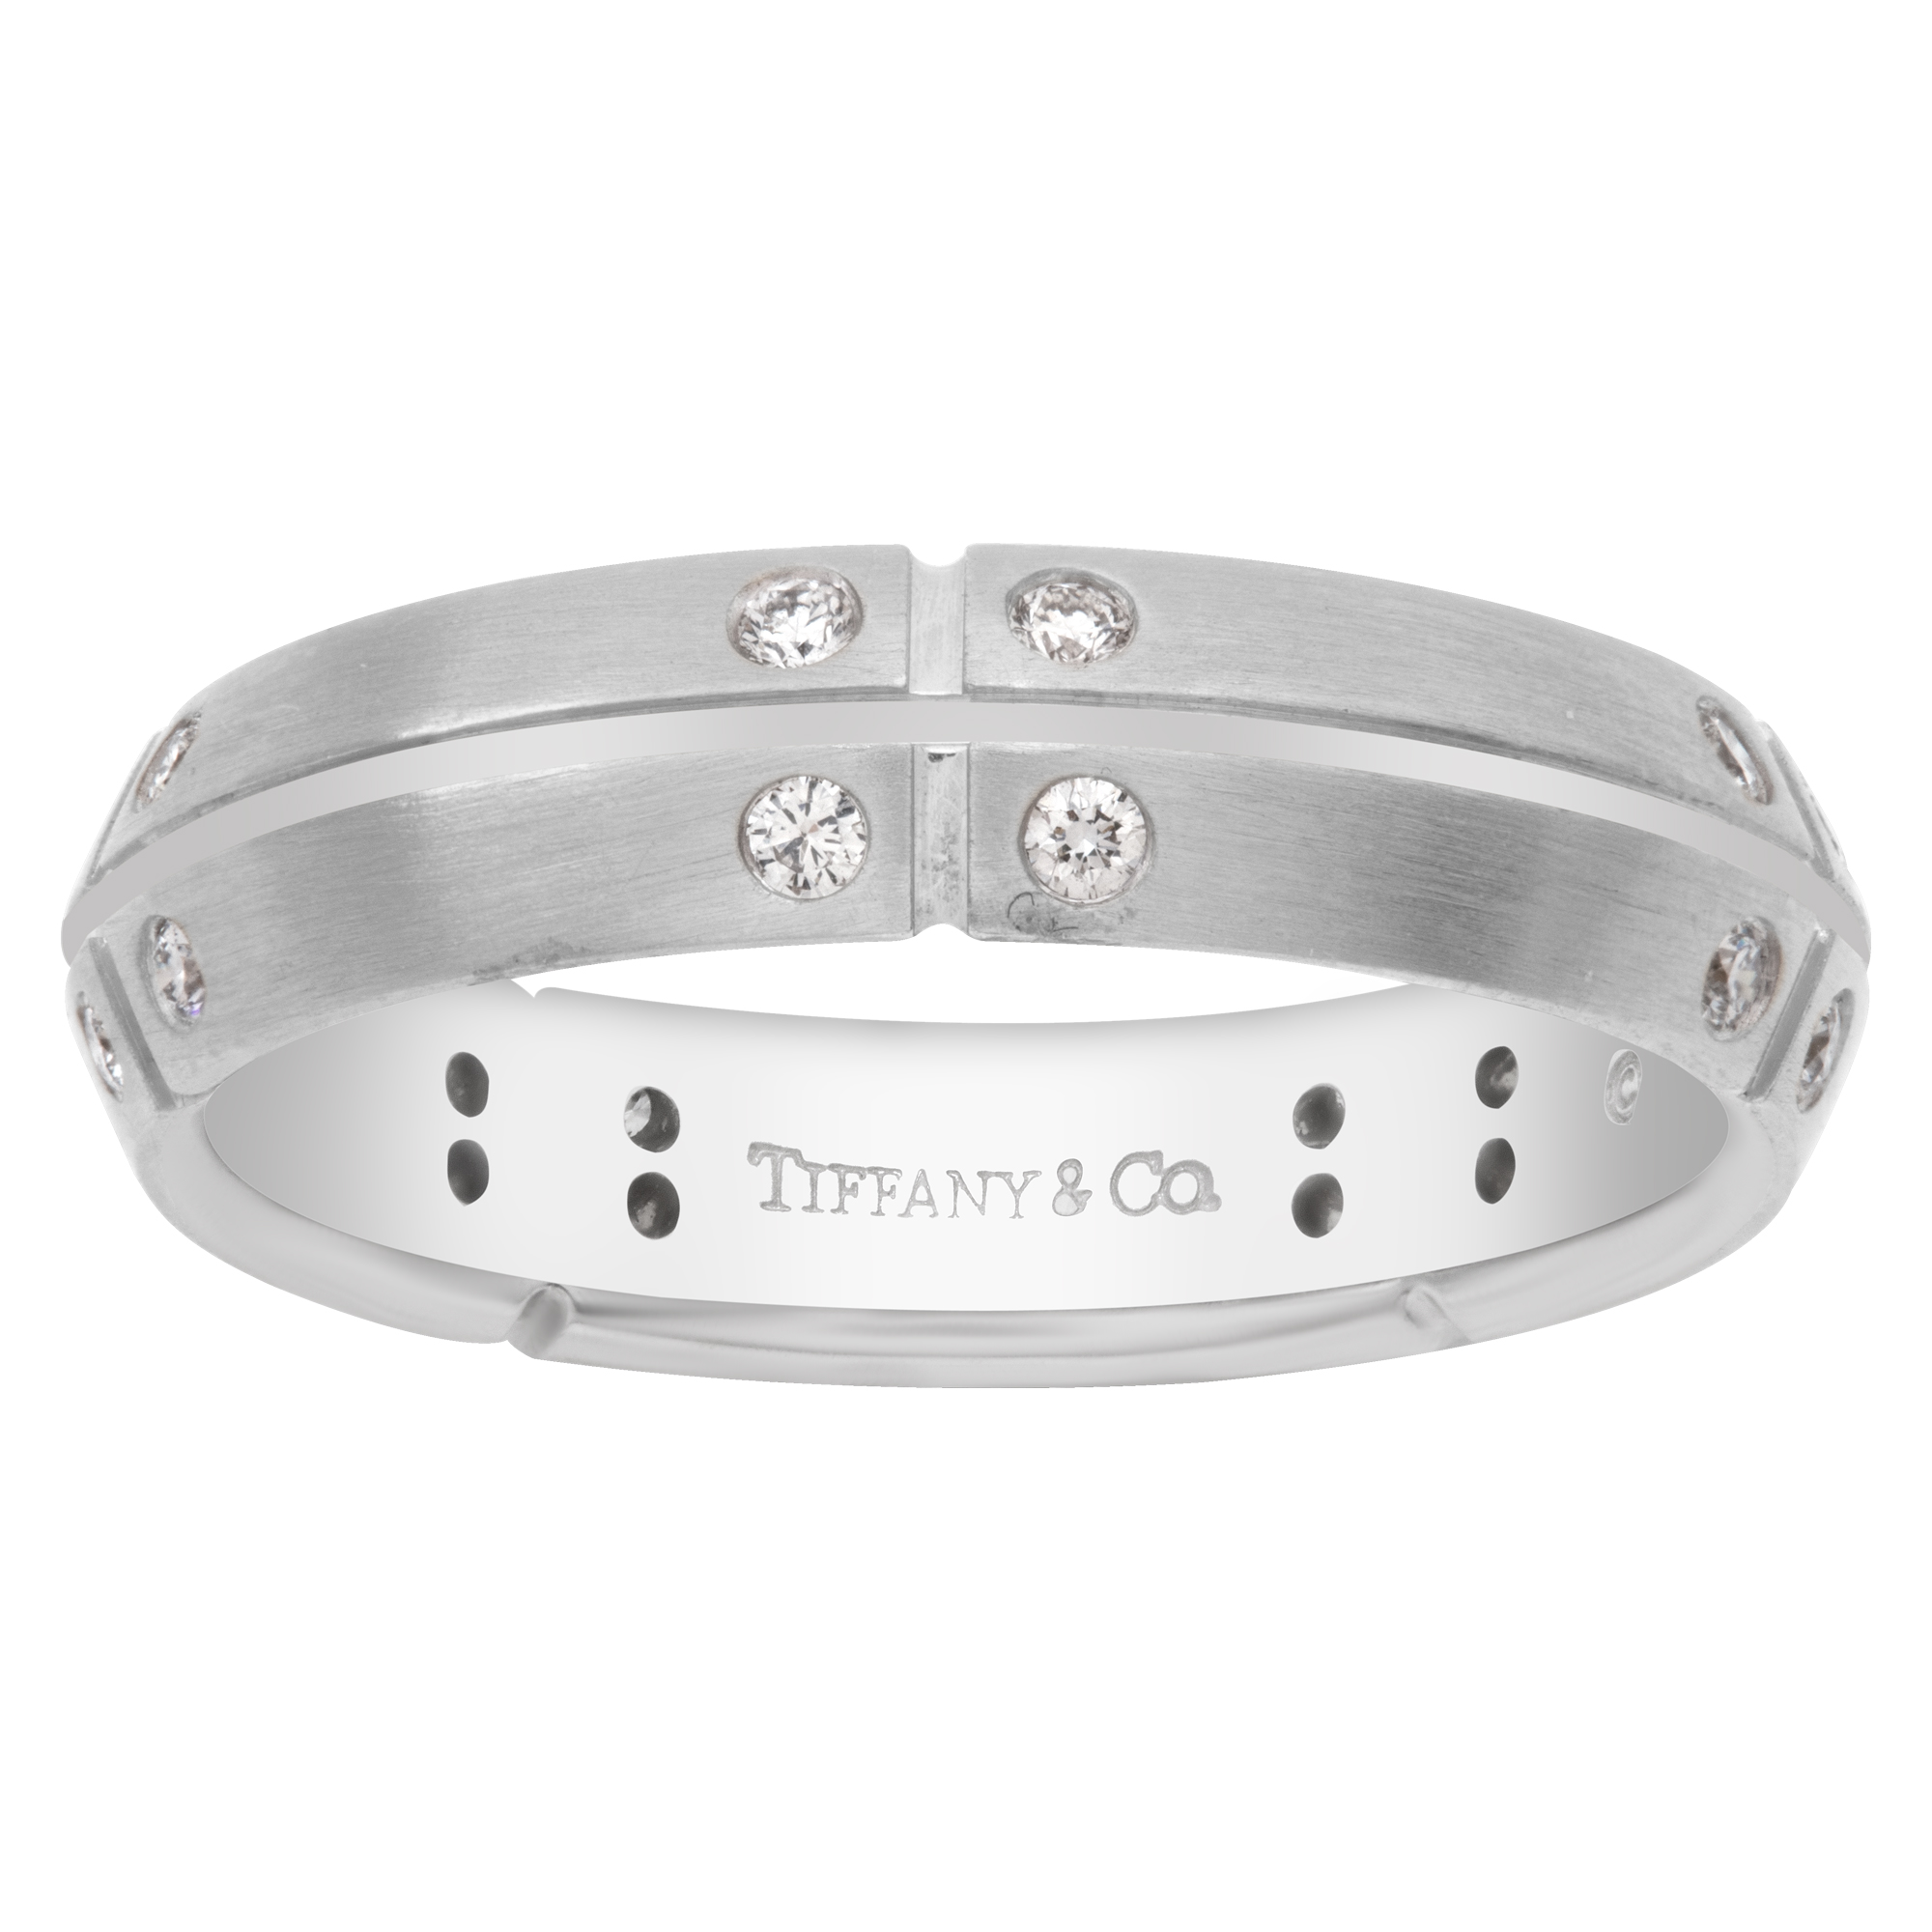 Tiffany & Co. Streamerica band with Diamonds 0.20 carat in 18k white gold. Size 8.5. image 1